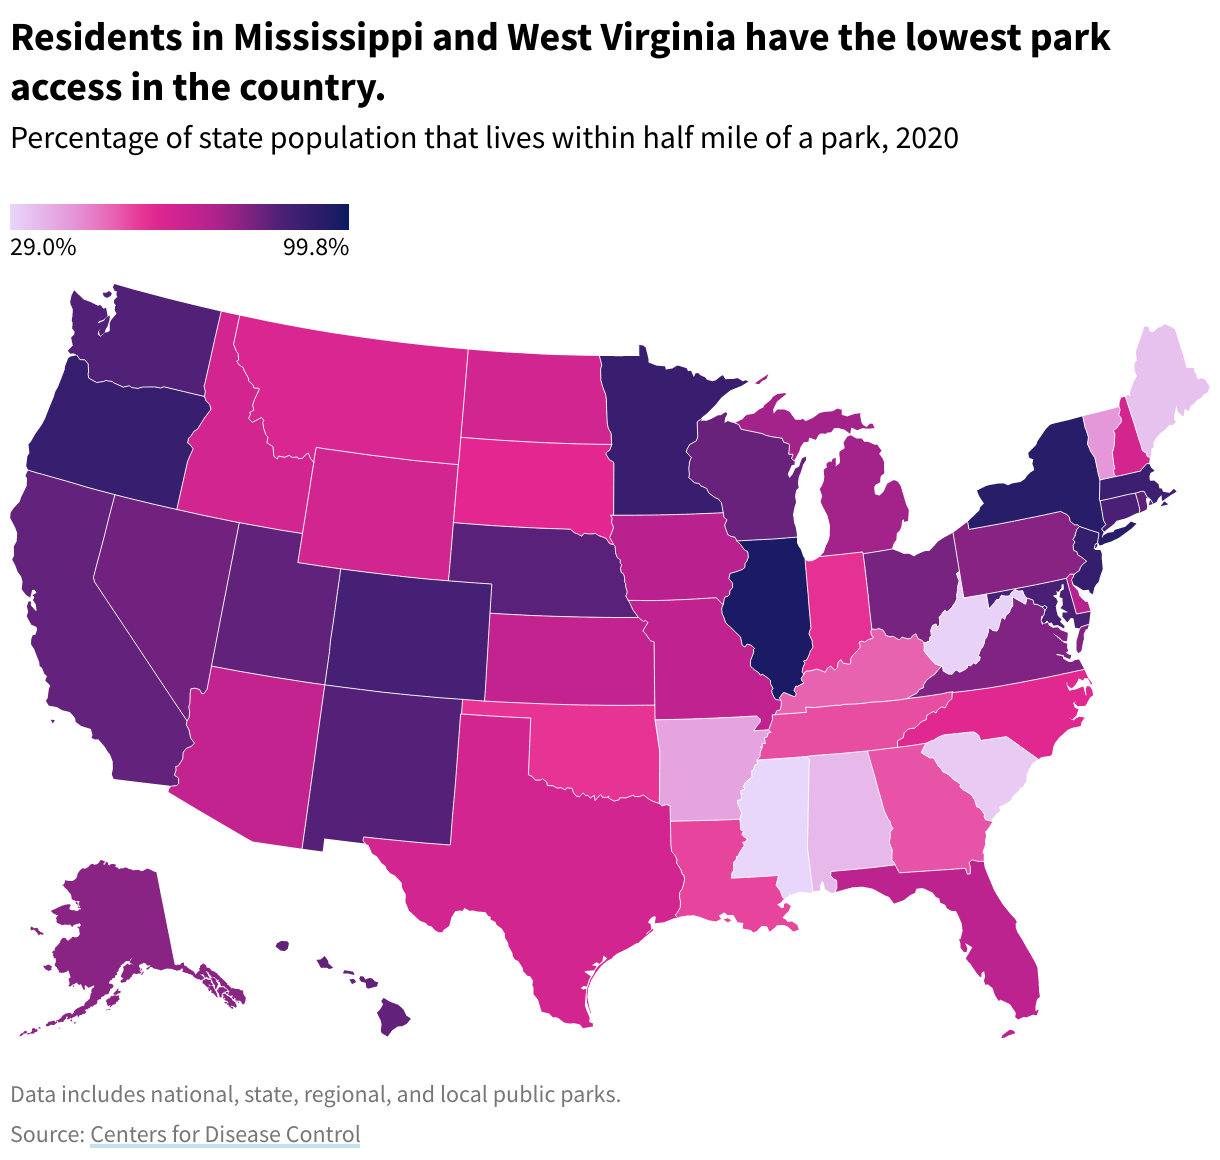 Map showing that many states in the deep south, including Mississippi, AL, and South Carolina have the lowest park access, with around 30% of residents living within 1/2 mile of a park. DC has the highest, followed by New York and Illinois.